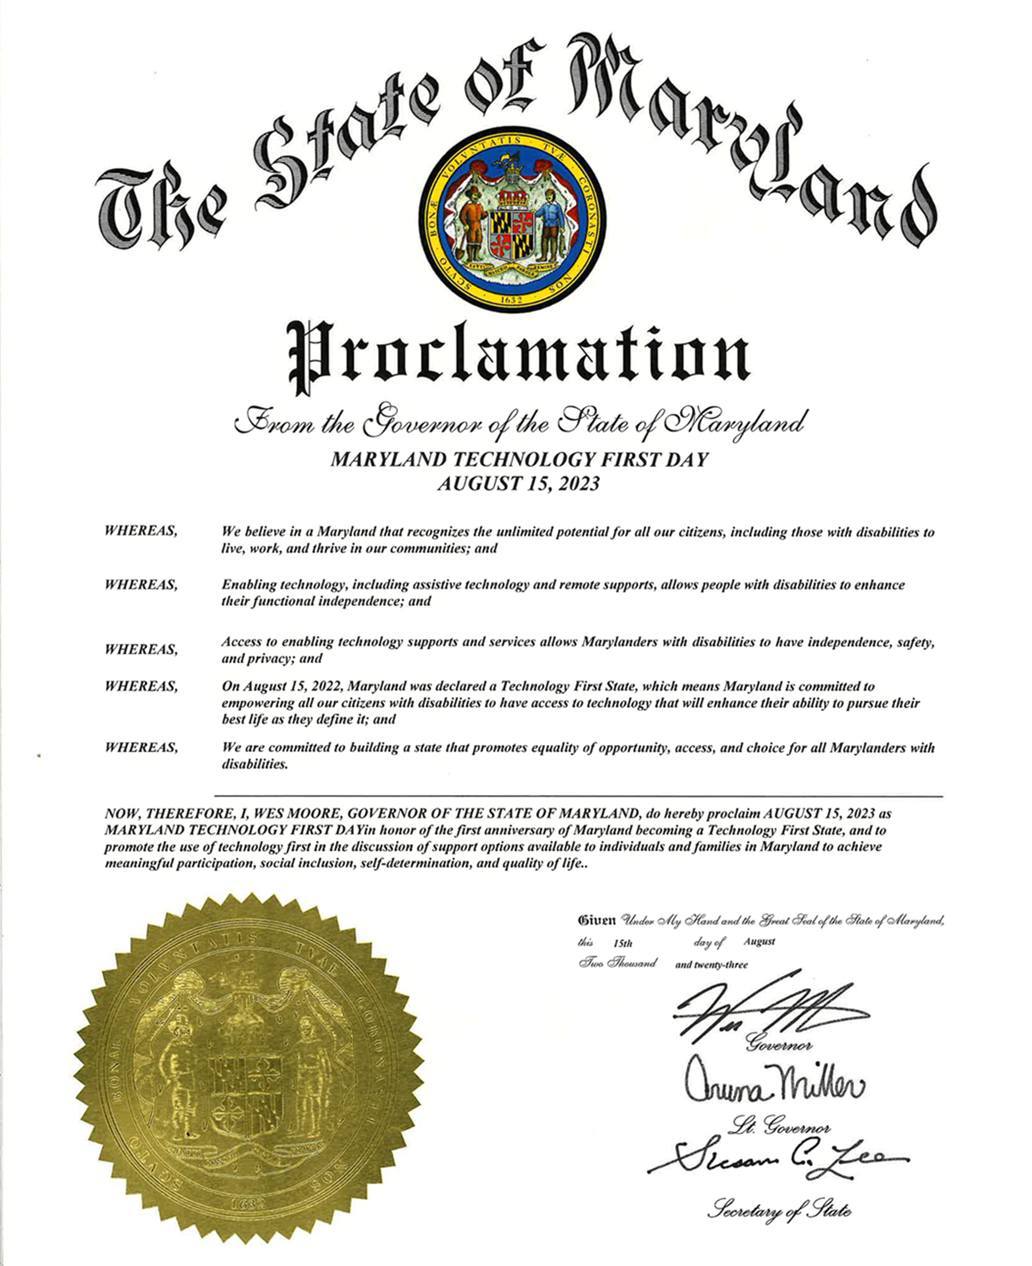 Thumbnail image of the Maryland Technology First Day Proclamation from 2023